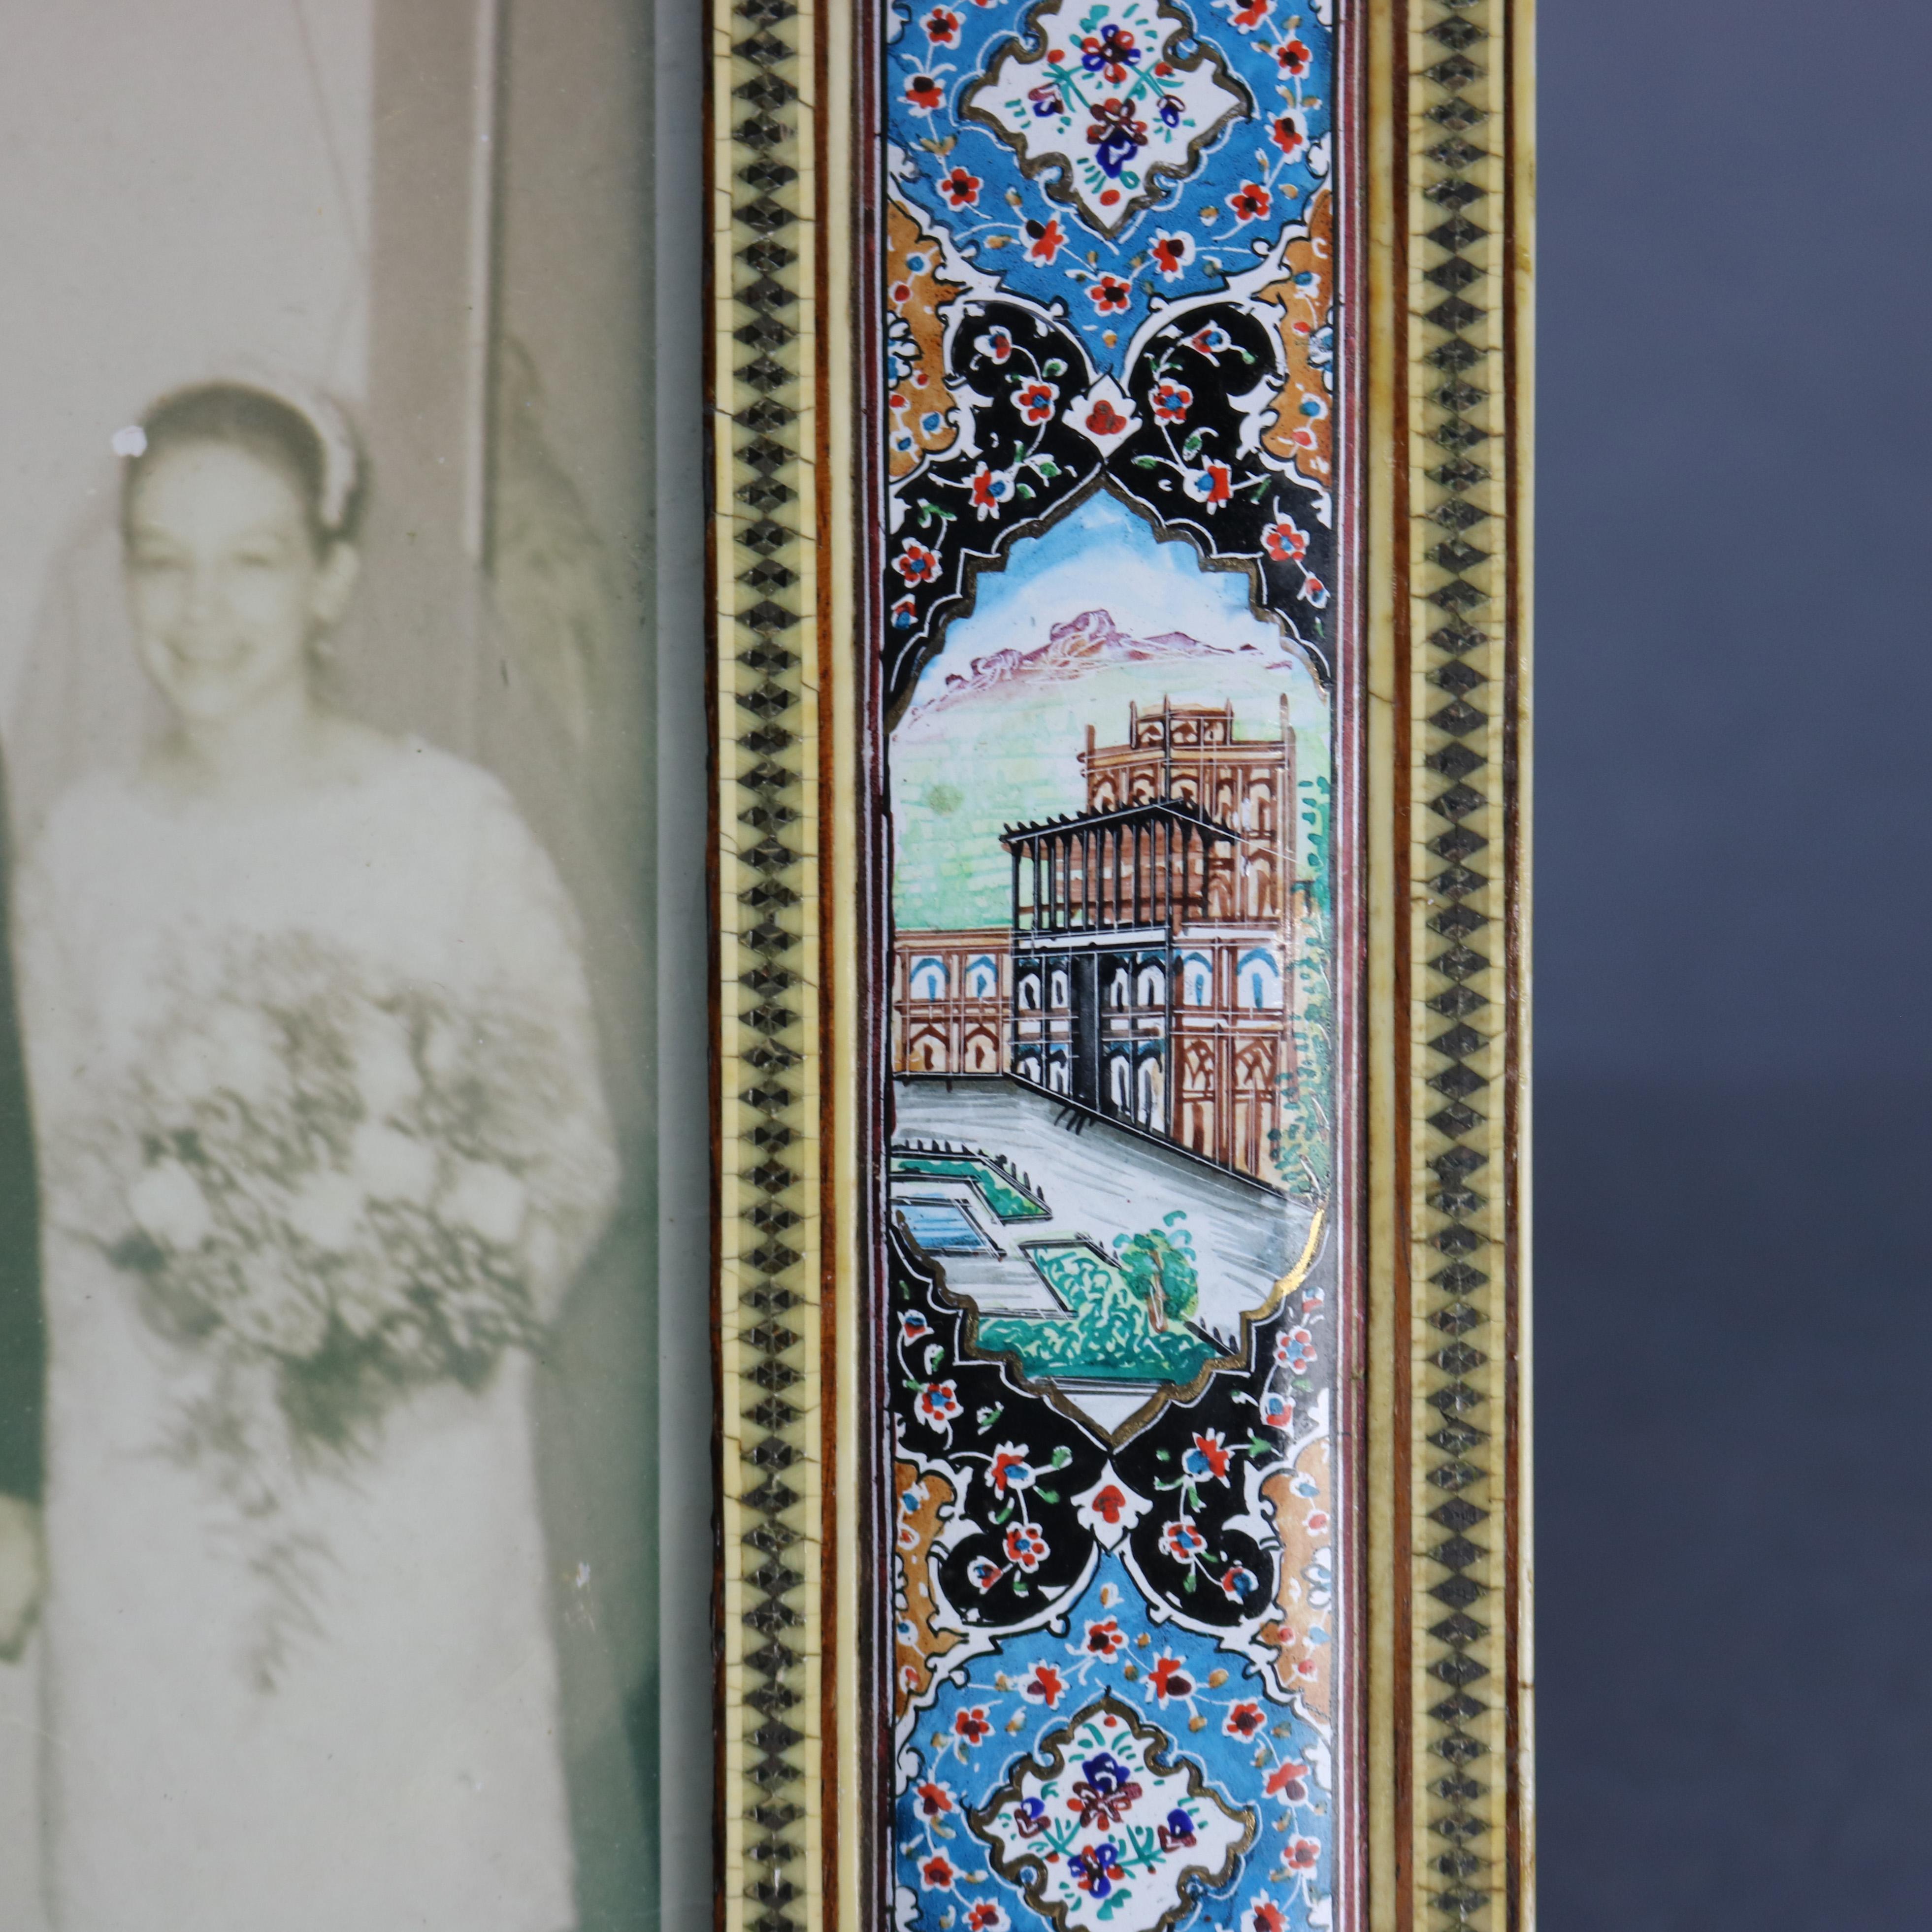 Gilt Antique Persian Pictorial Enamel on Copper Picture Frame, 19th Century